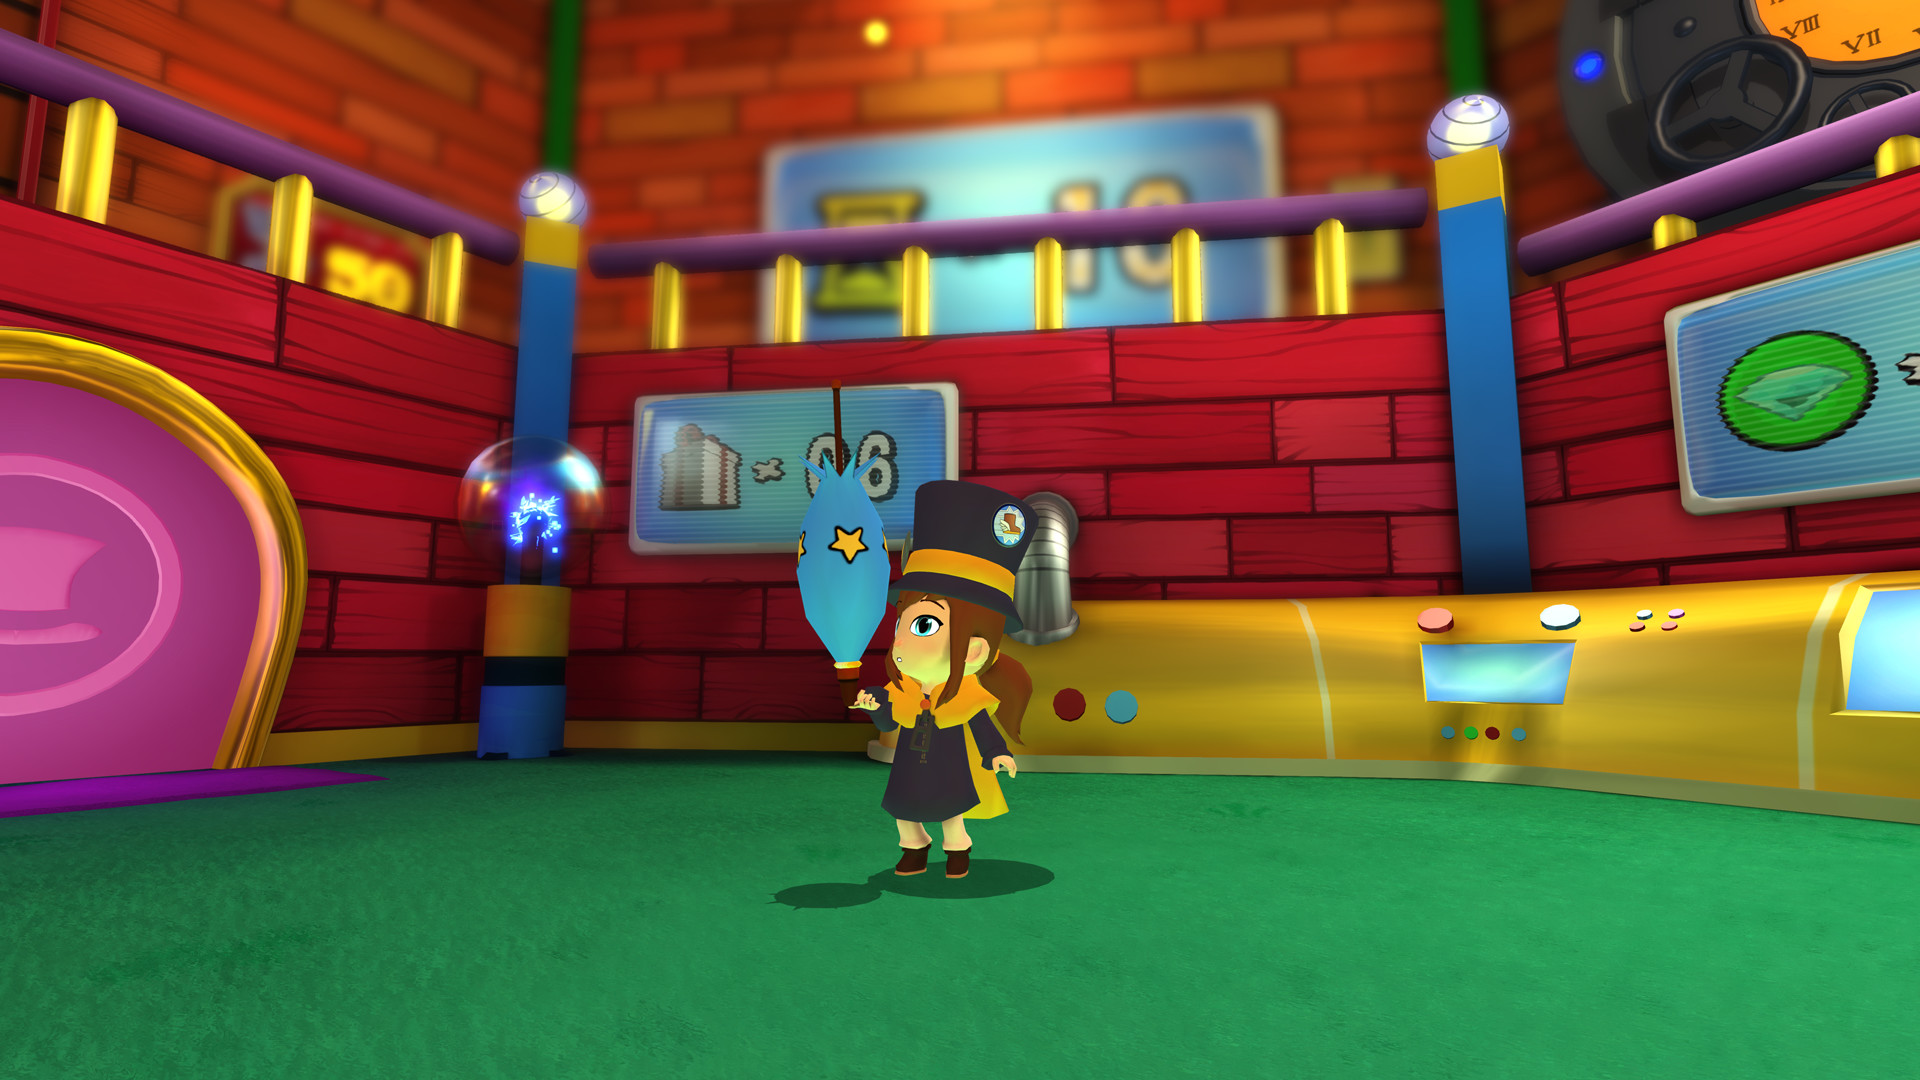 Save 50% on A Hat in Time on Steam